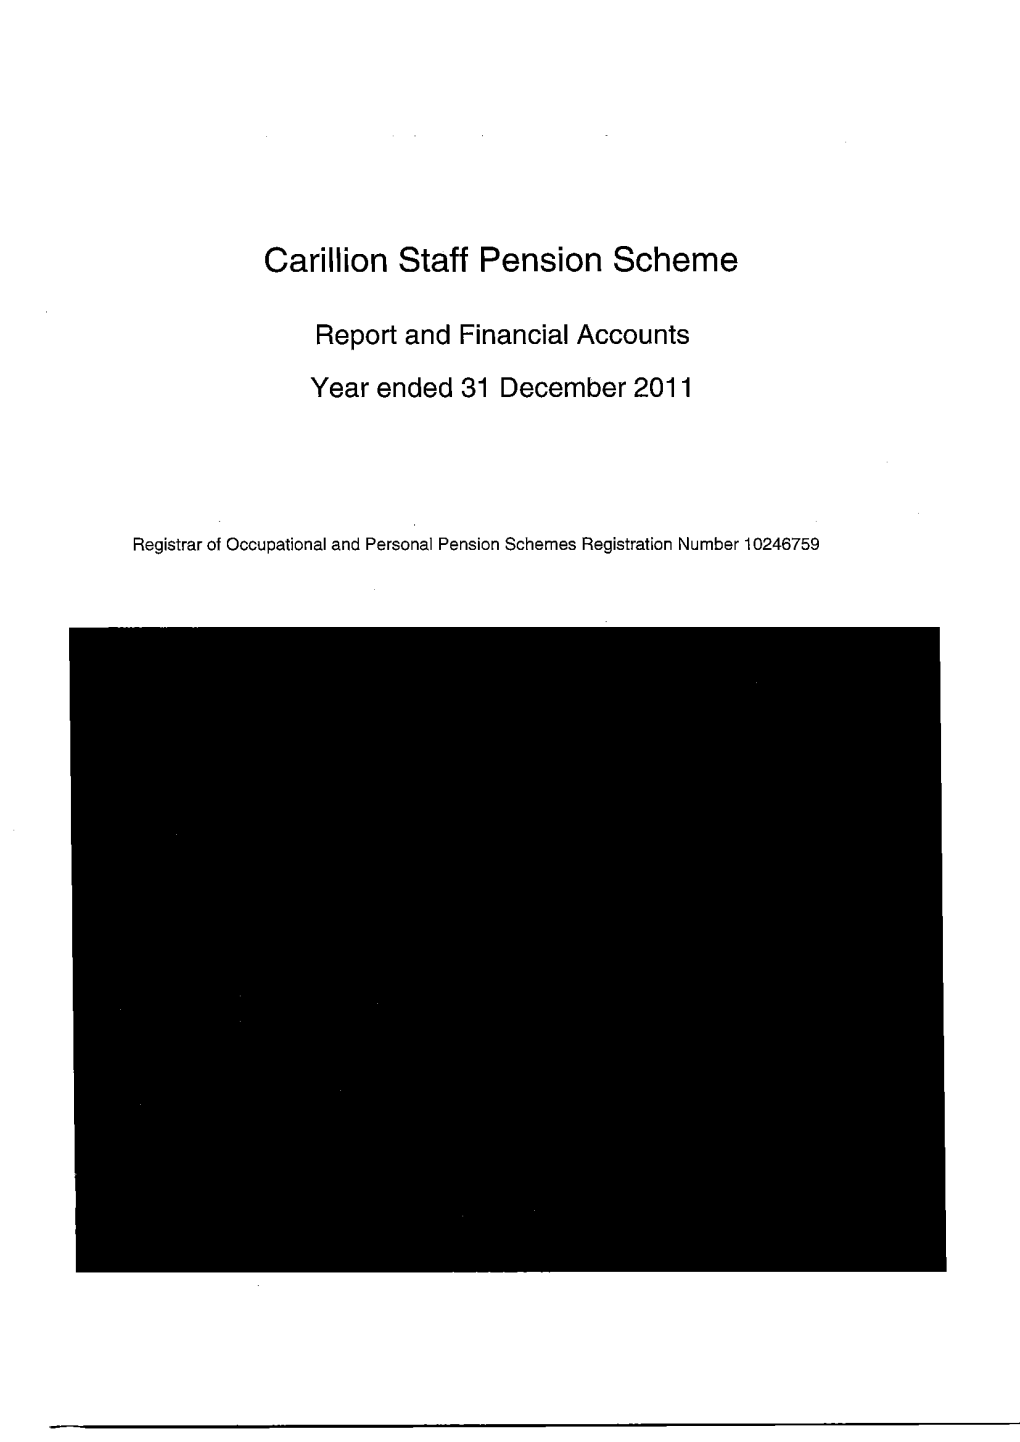 2011 Carillion Staff Report and Accounts